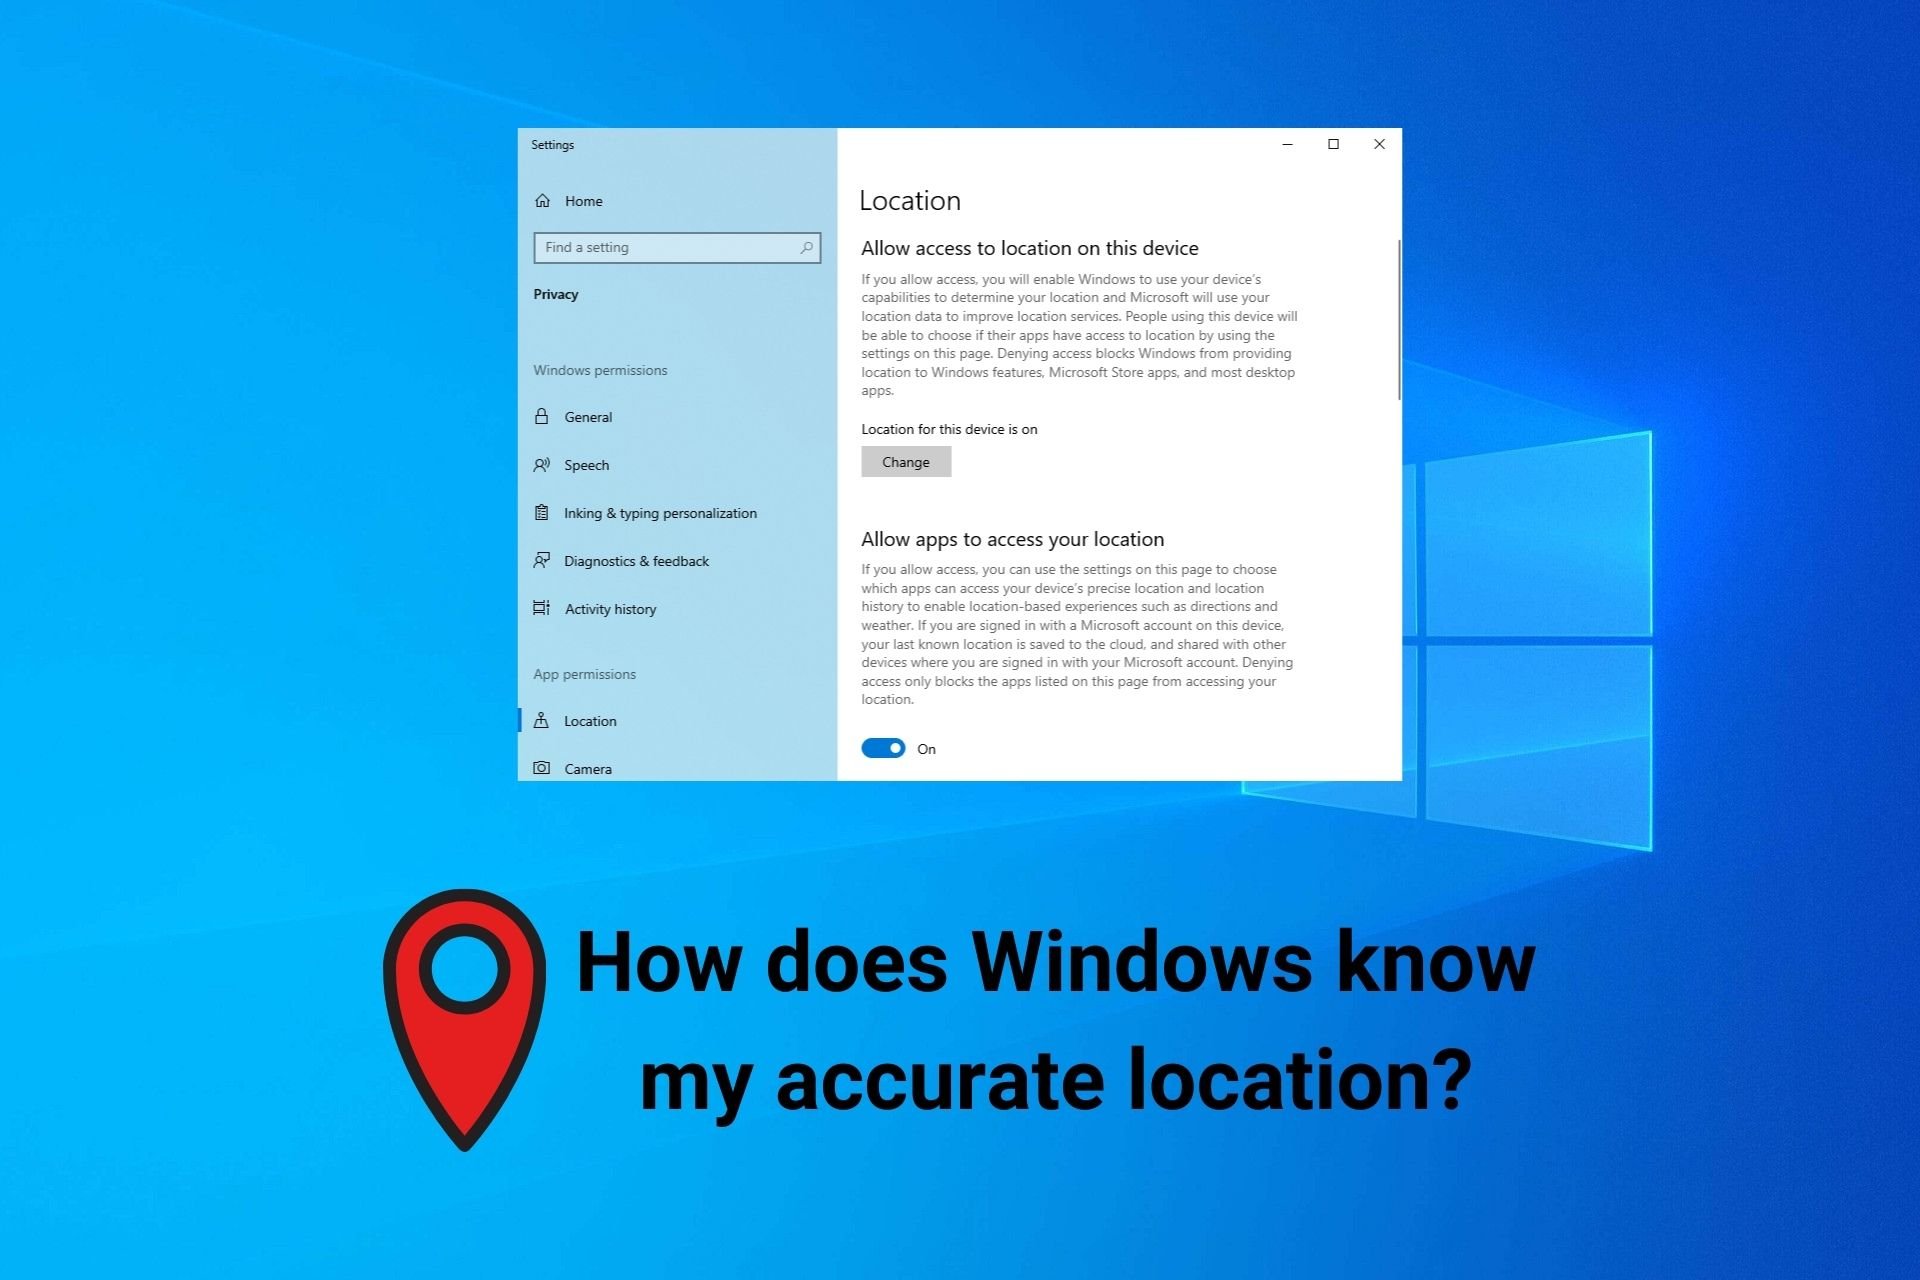 how does Windows know my location accurately